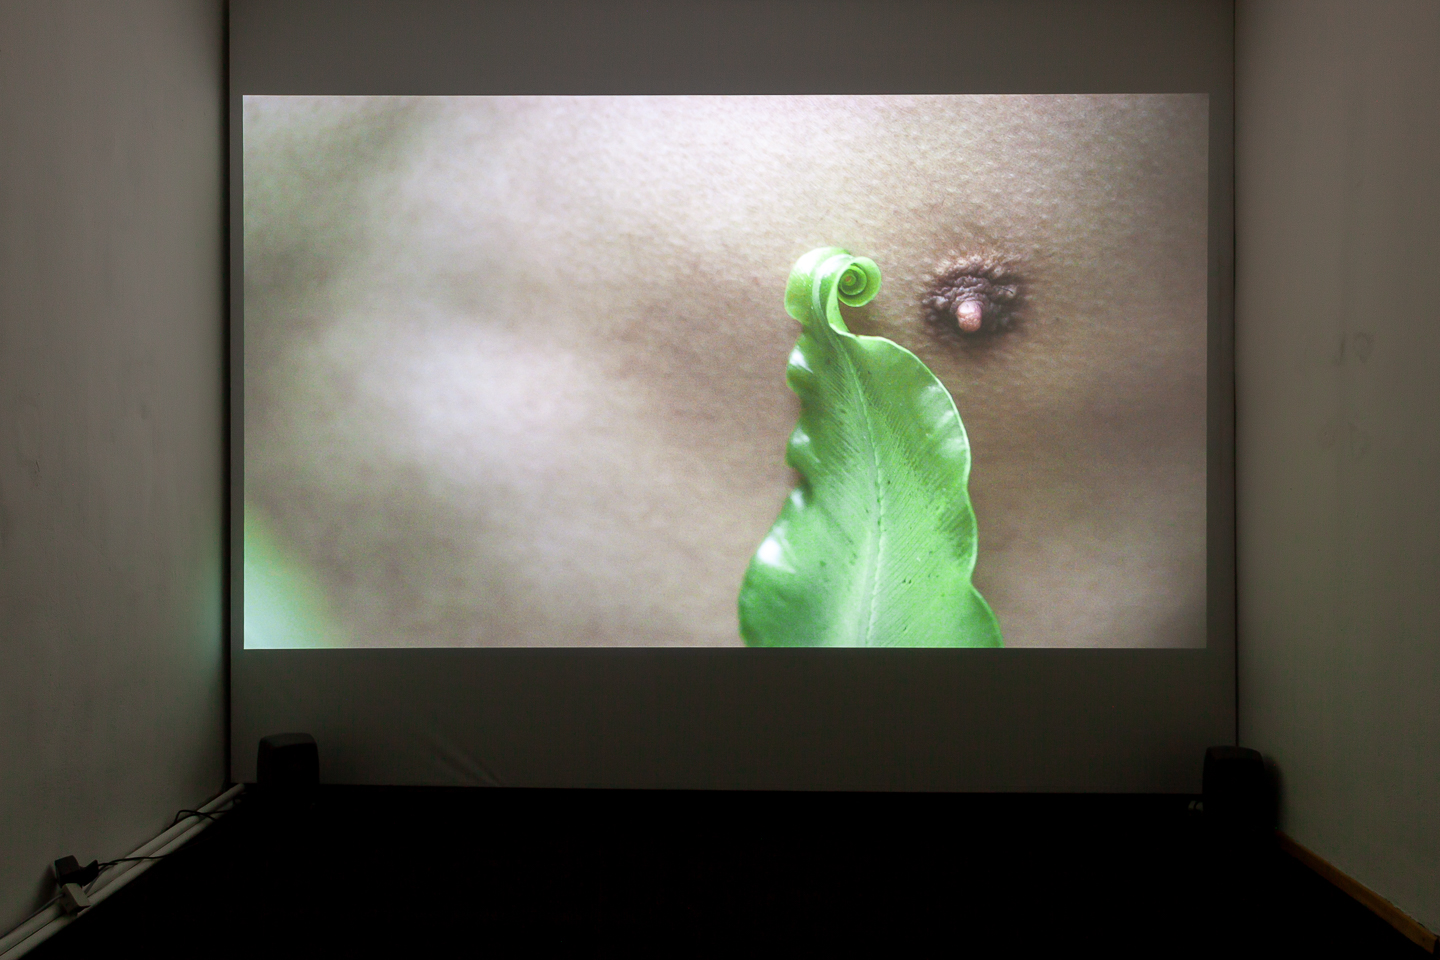 Zheng Bo*1974 in Beijing, lives and works in Hong KongPteridophilia II2018, 4K video, colour, sound, 20.00 min Edition 2/5 + 2 AP